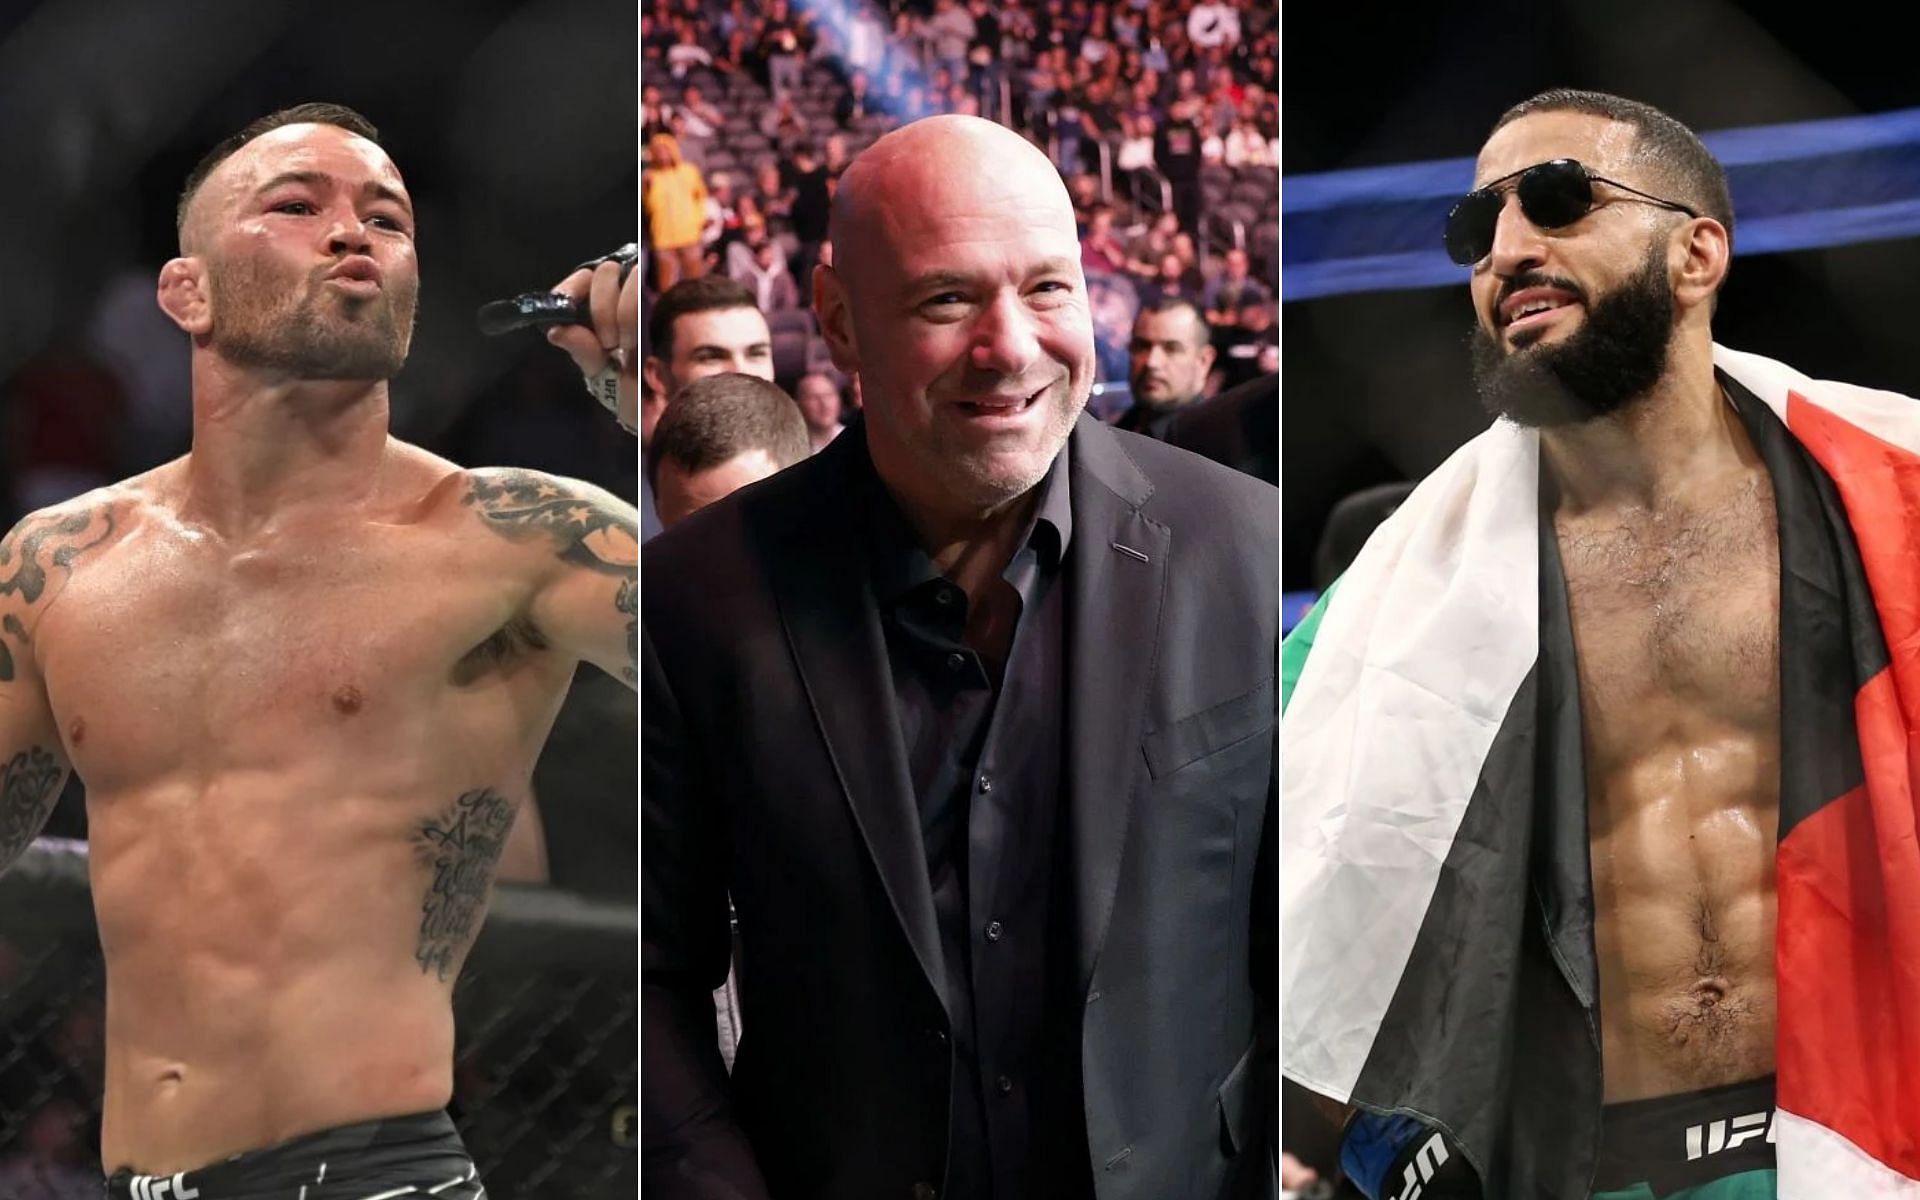 Colby Covington [Left], Dana White [Middle], and Belal Muhammad [Right]